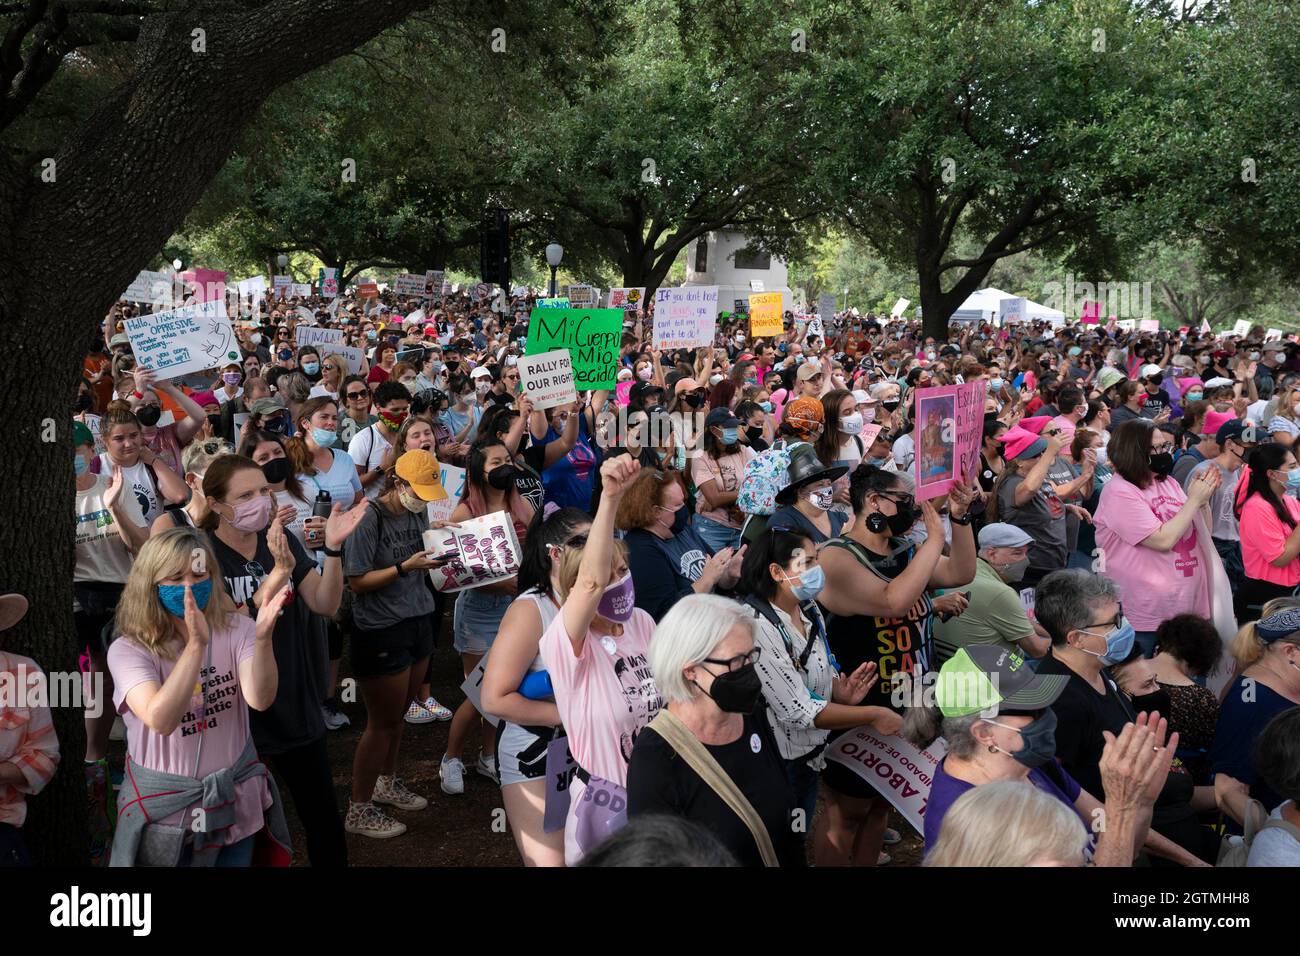 Austin Texas USA, Oct. 2 2021: Several thousand Texas women rally at the Capitol south steps to protest recent Texas laws passed restricting women's right to abortion. A restrictive Texas abortion law makes it a crime to have an abortion after six weeks in most cases. Credit: Bob Daemmrich/Alamy Live News Stock Photo